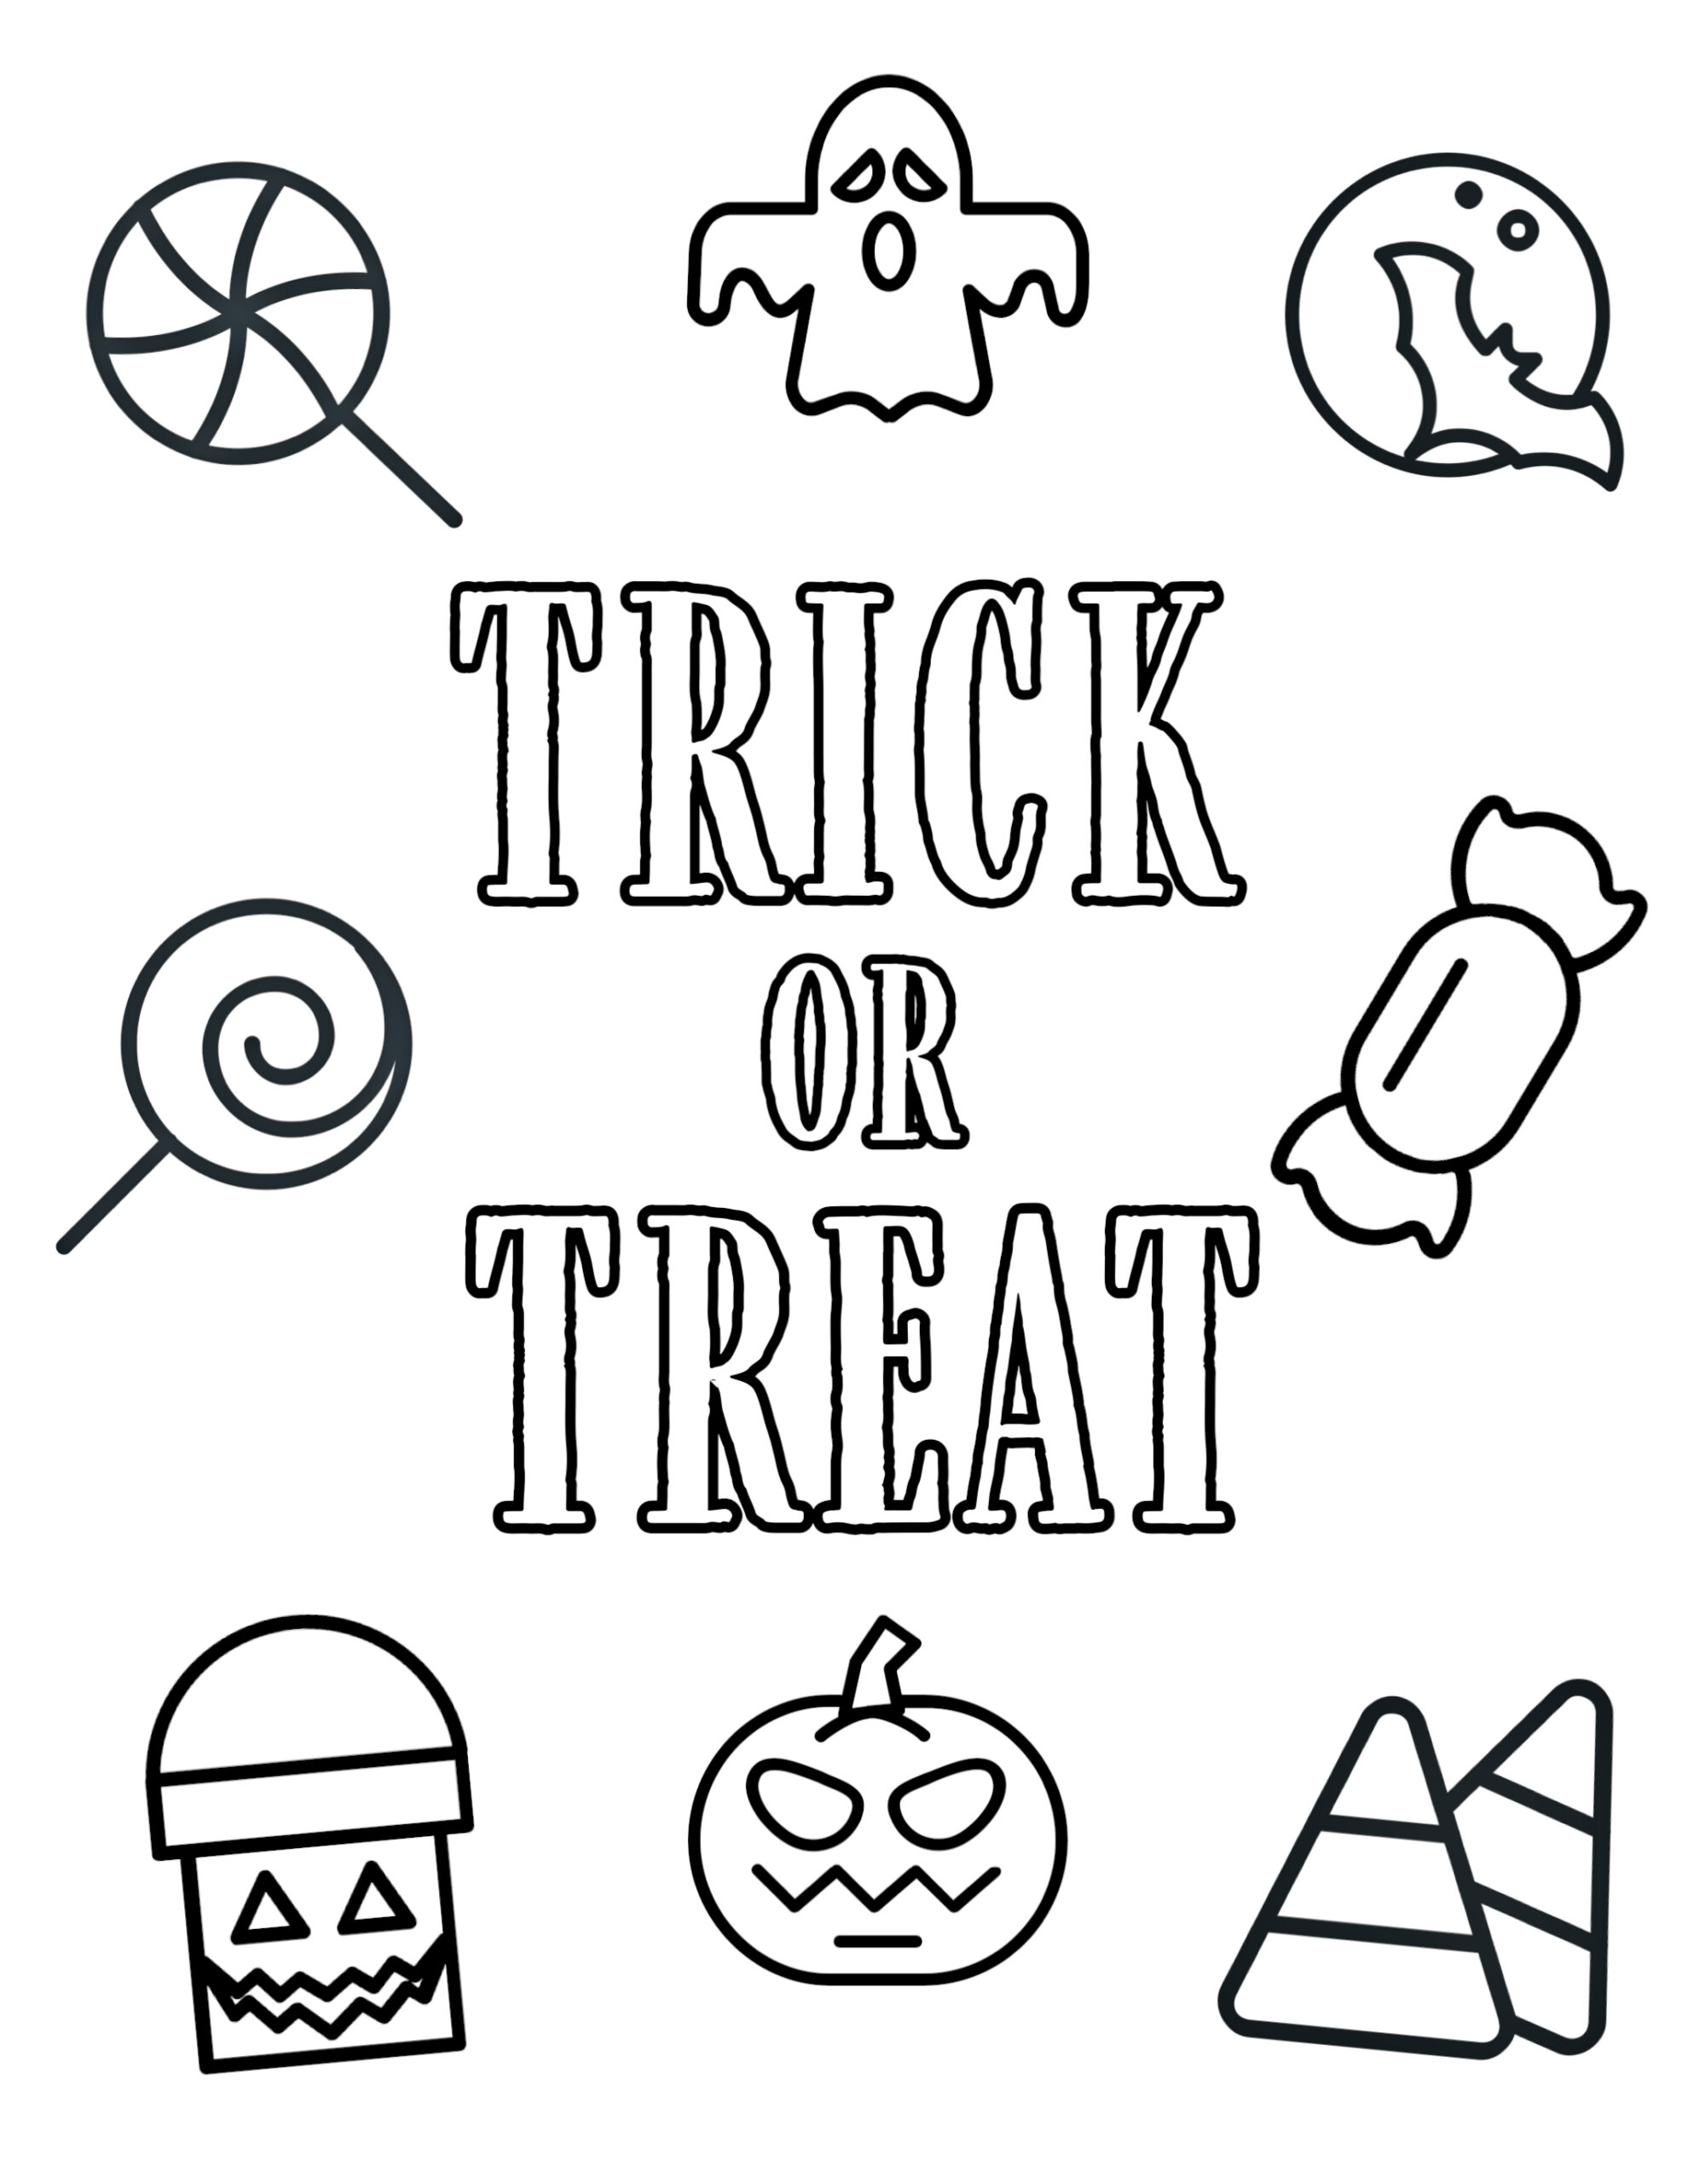 Happy Halloween Coloring Pages - 75 Halloween Coloring Pages Free